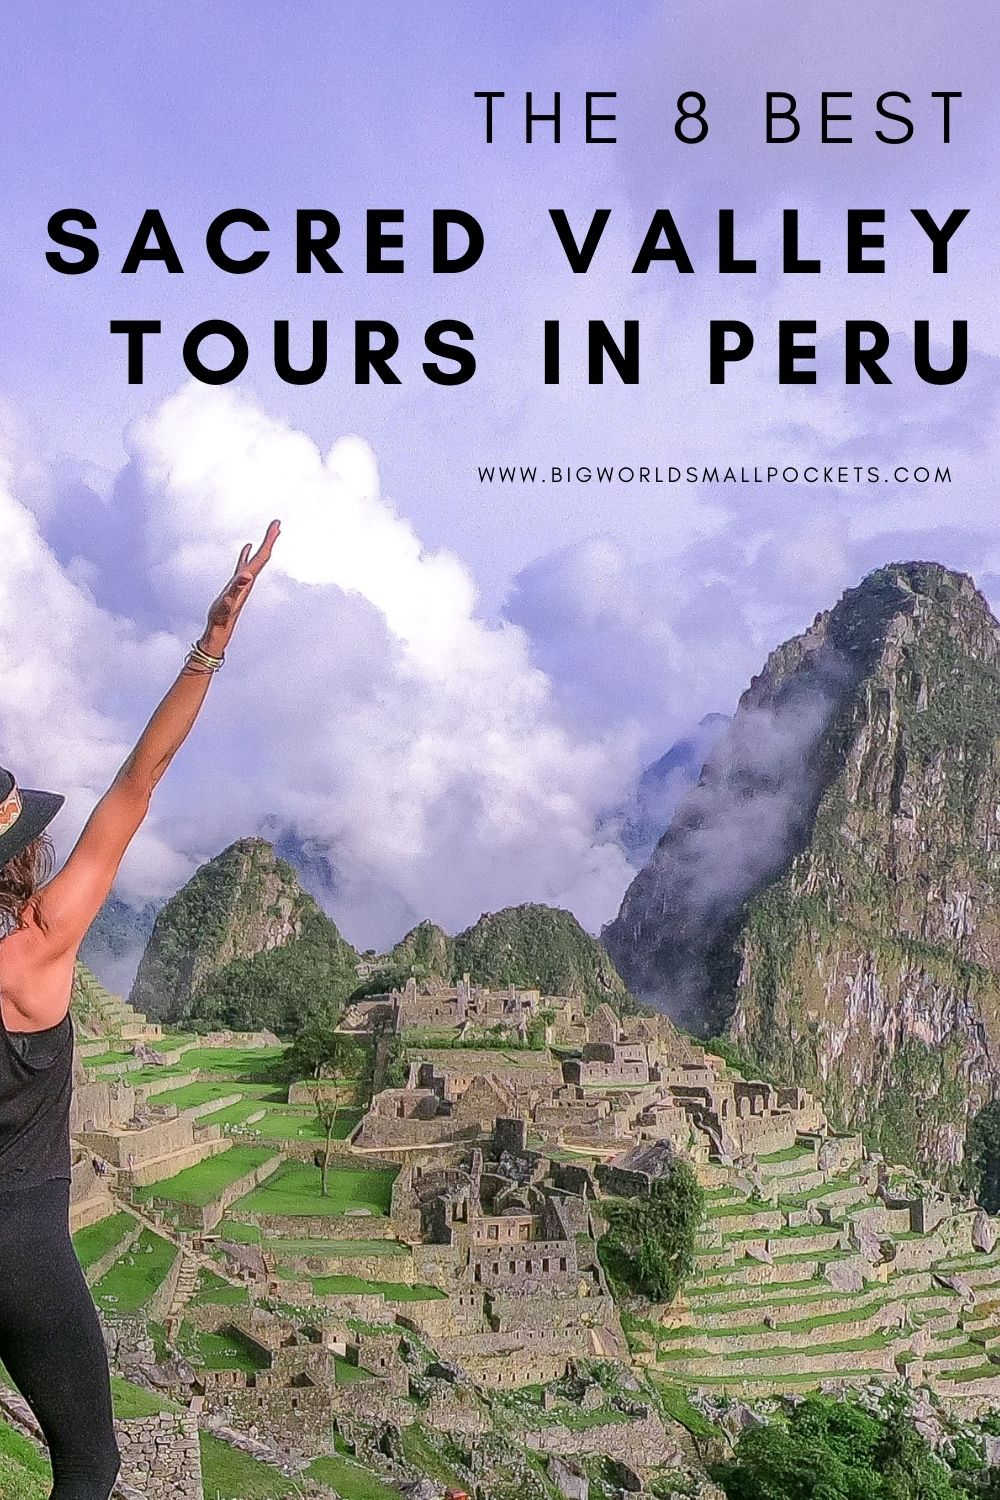 The 8 Best Sacred Valley Tours in Peru